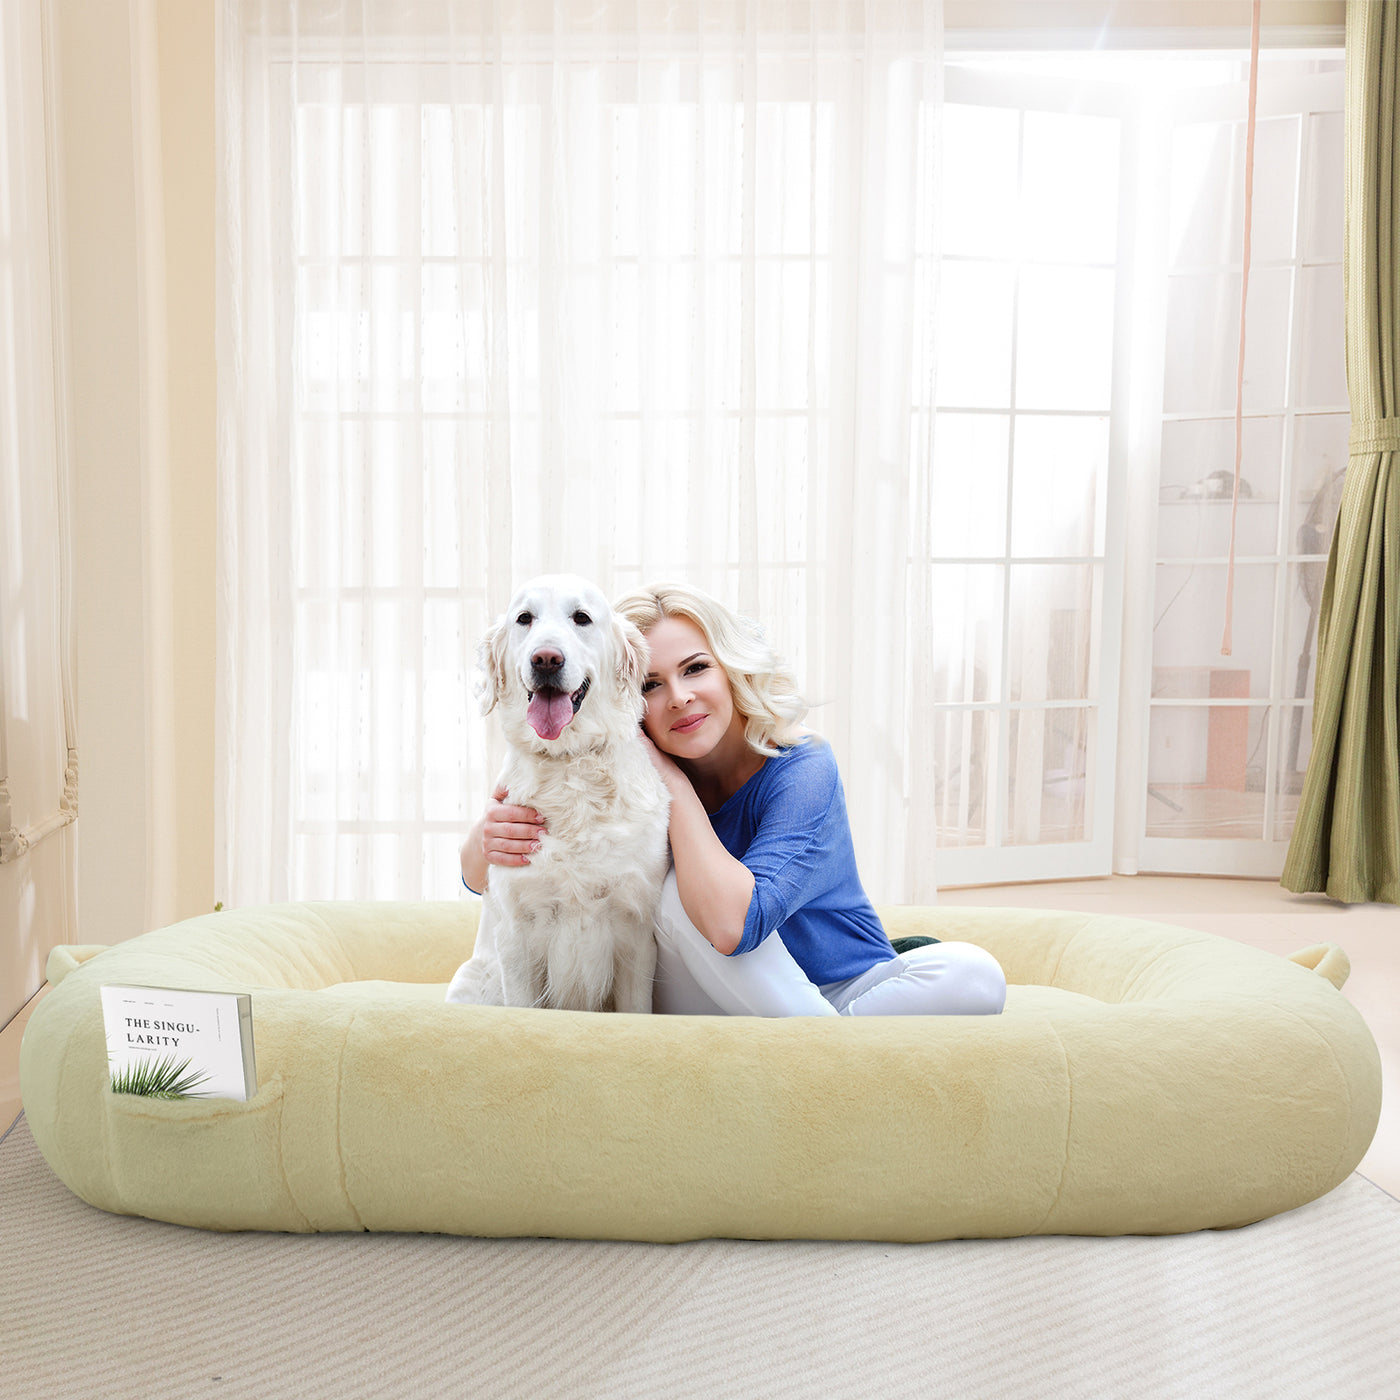 MAXYOYO Human Dog Bed, Faux Fur Giant Bean Bag Bed for Humans and Pets, Beige